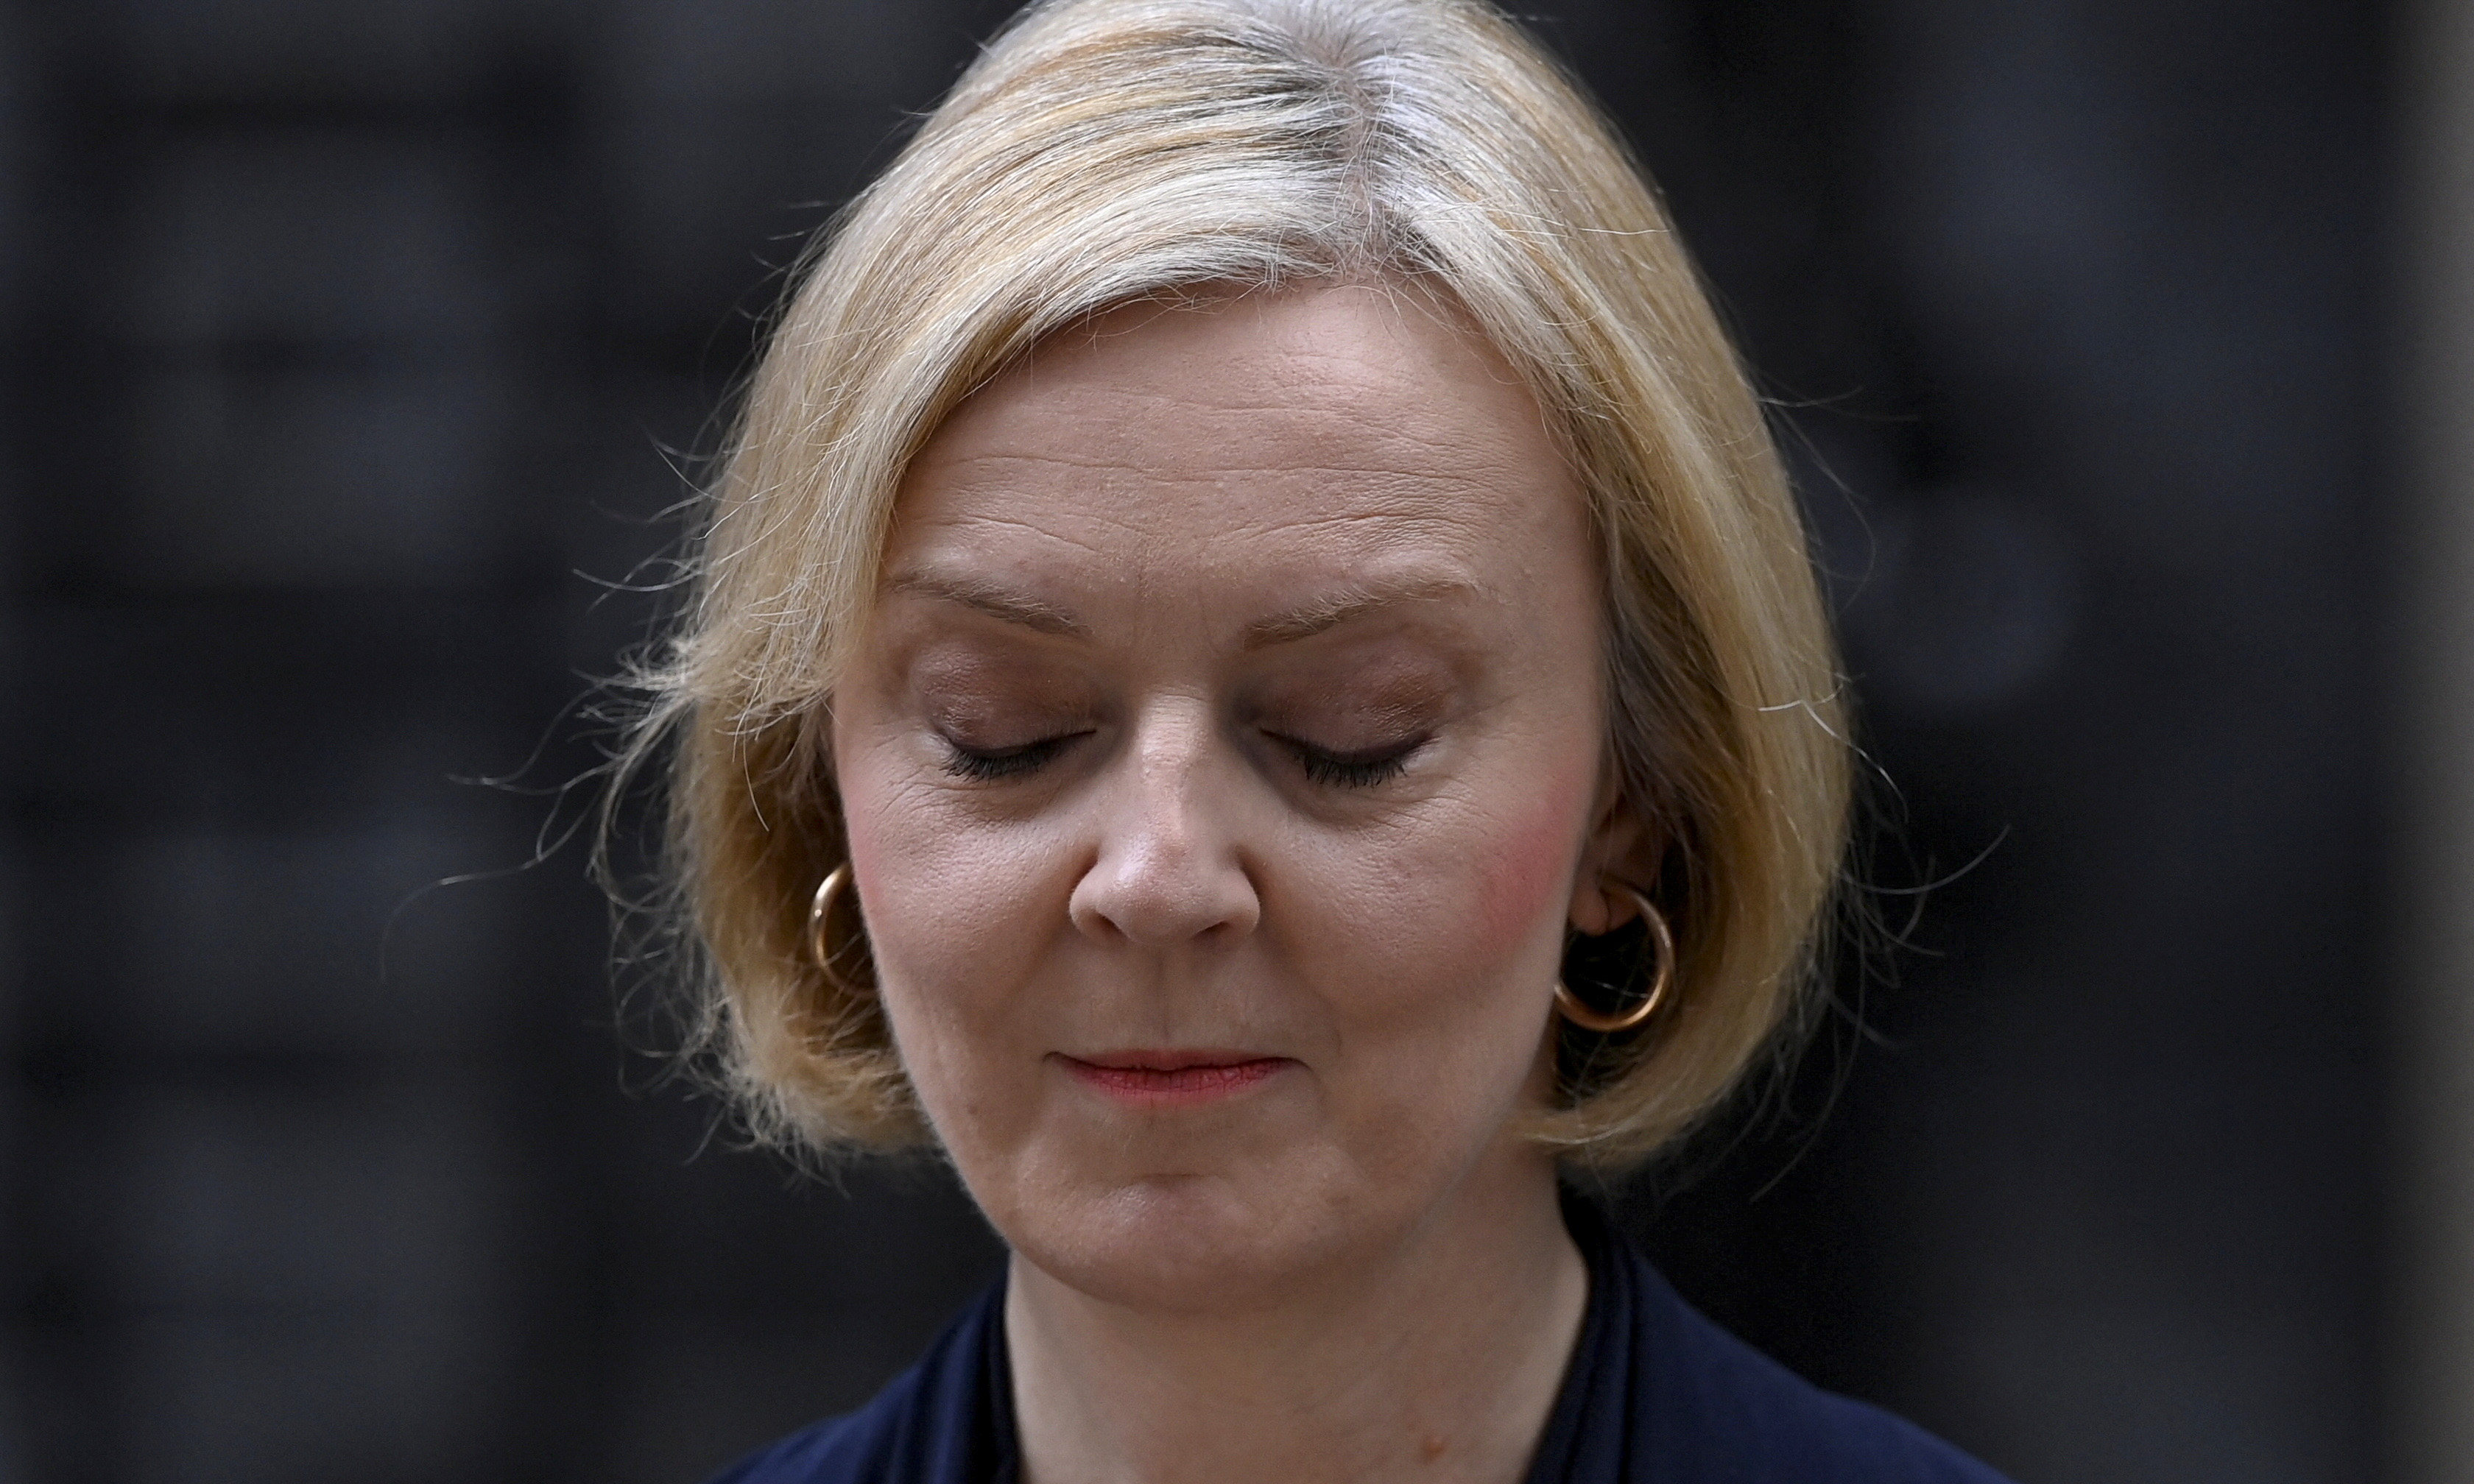 Former British prime minister Liz Truss did not have time to do much on foreign affairs, according to one Chinese analyst. Photo: Reuters